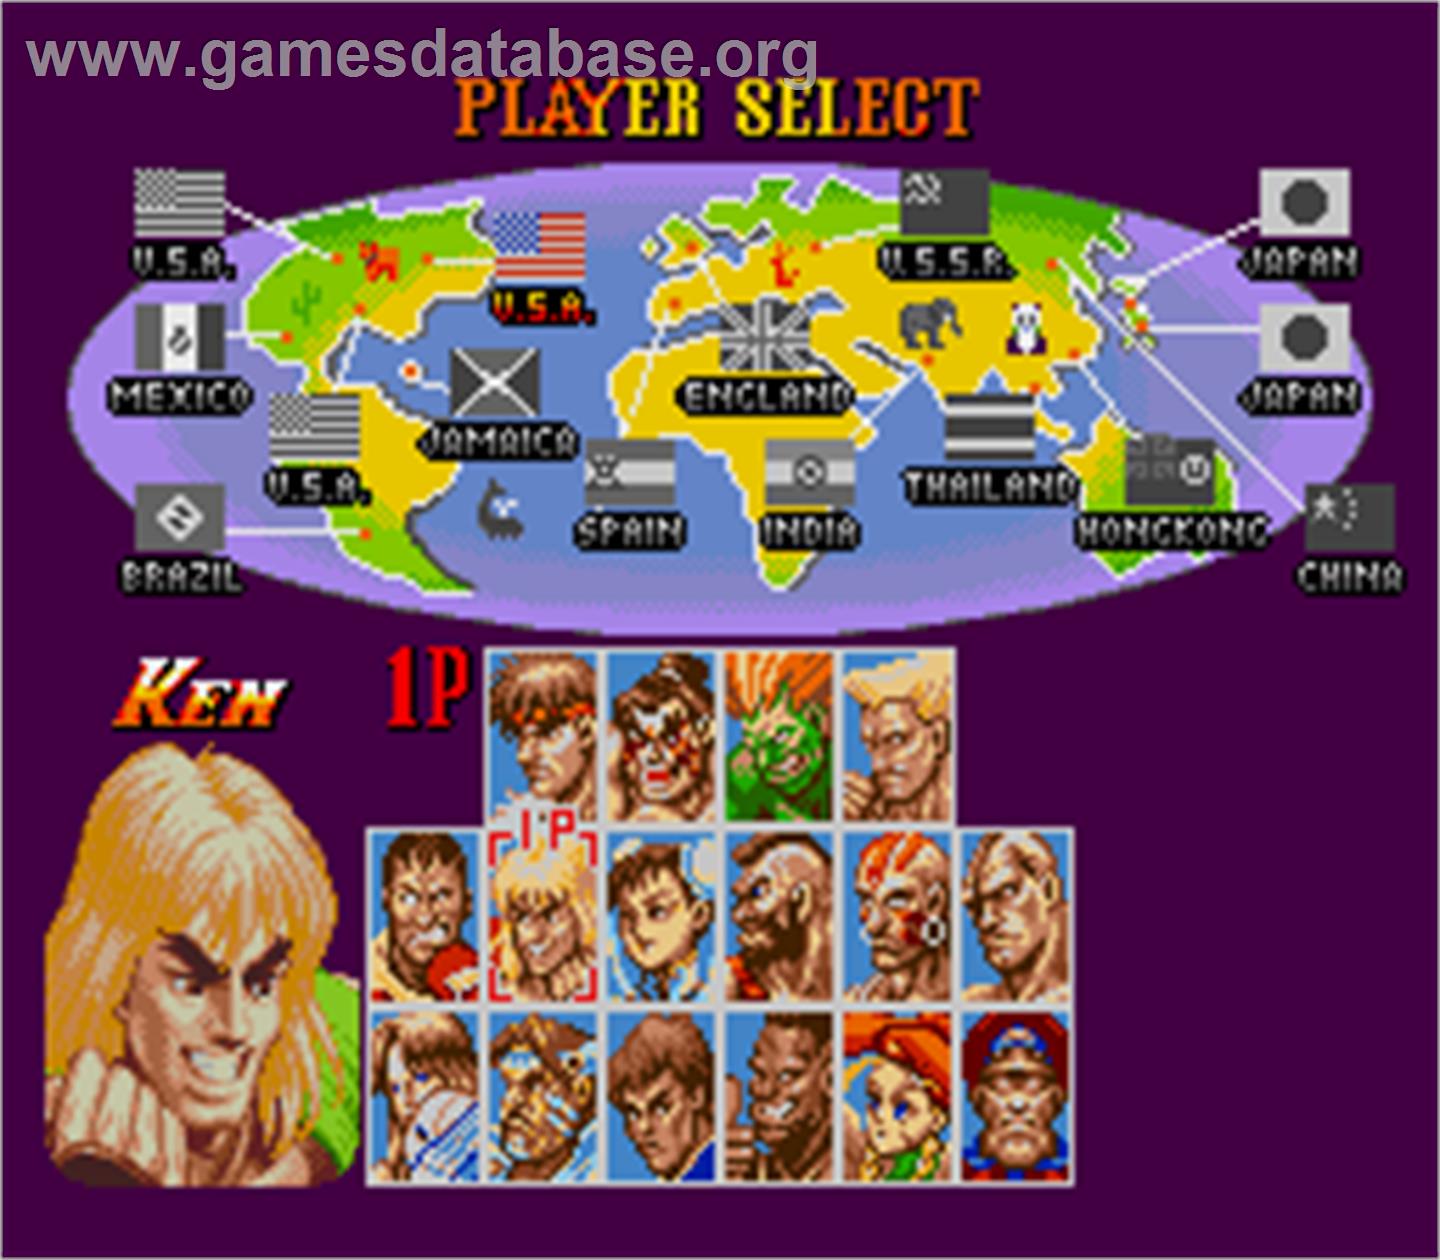 Super Street Fighter II - The New Challengers - Arcade - Artwork - Select Screen